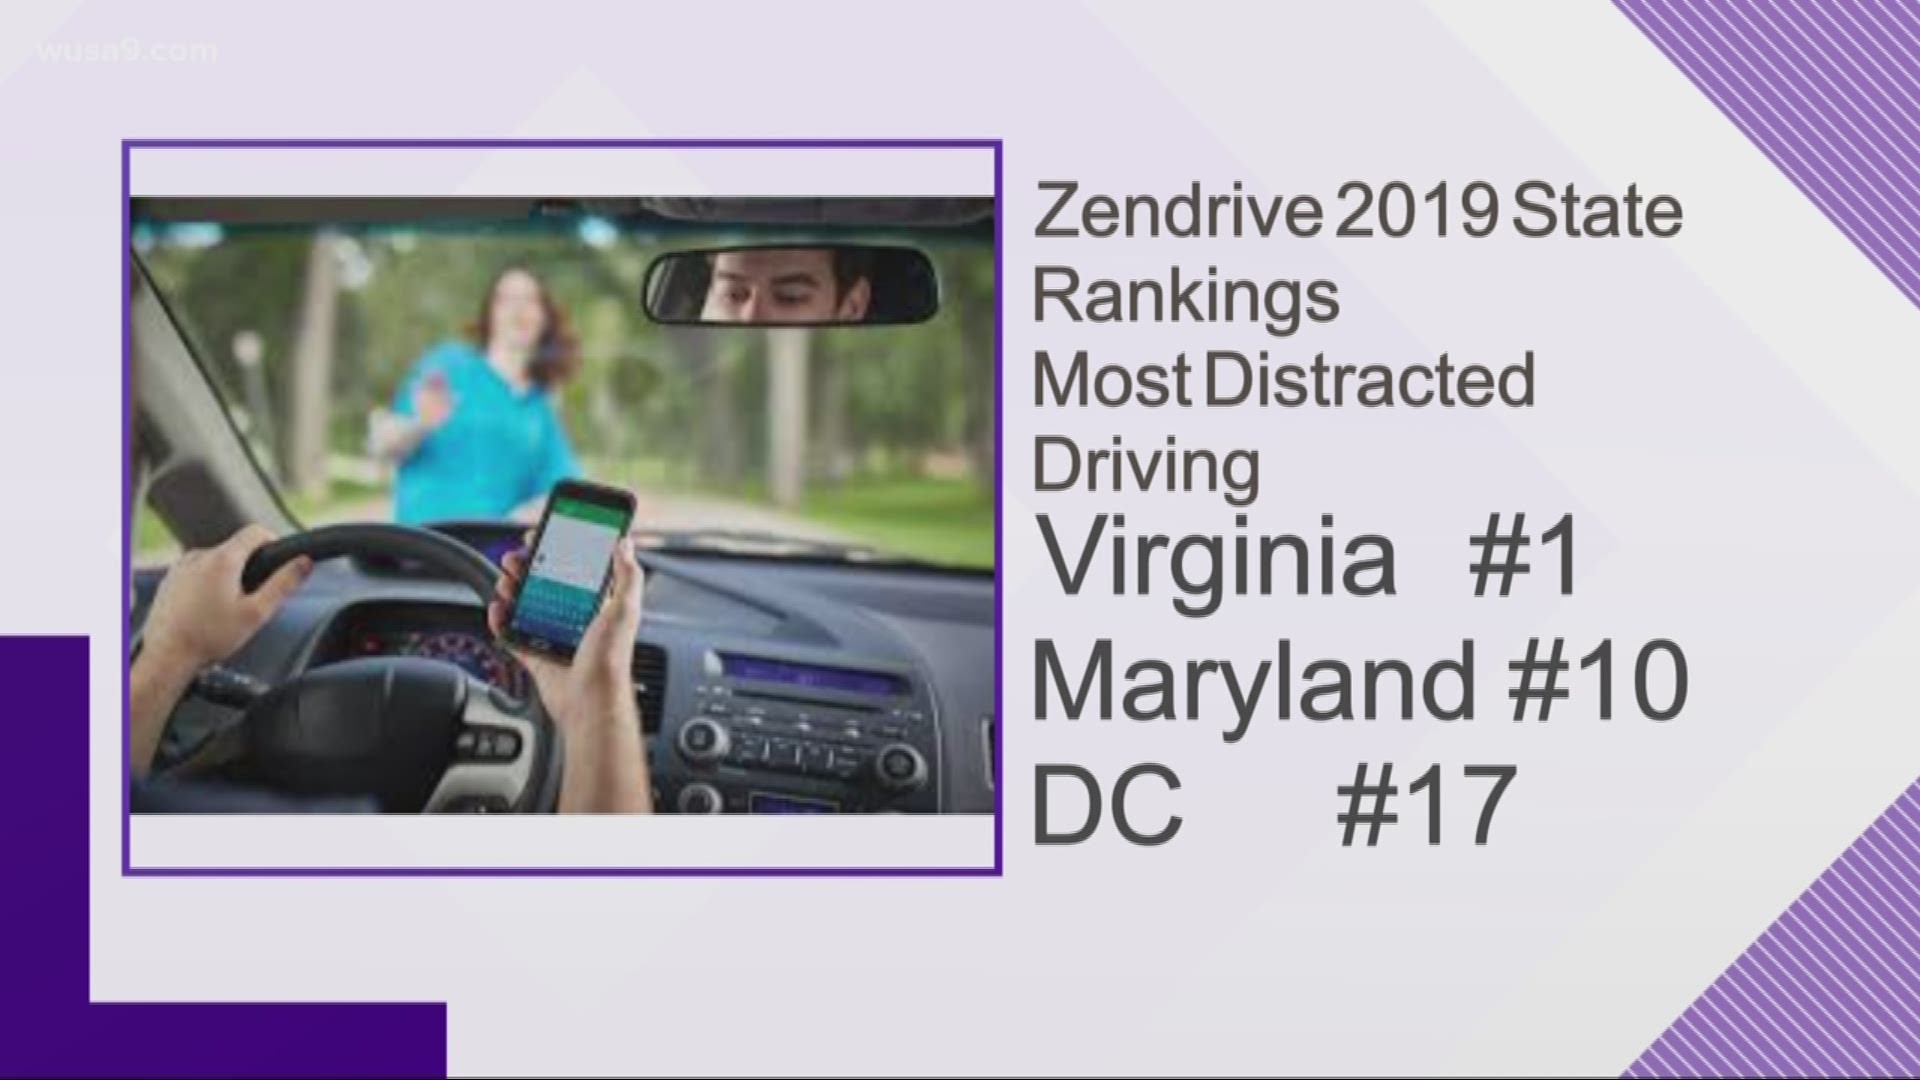 New research shows distracted driving has become an epidemic because of phone addicts' relentless addiction to stay connected